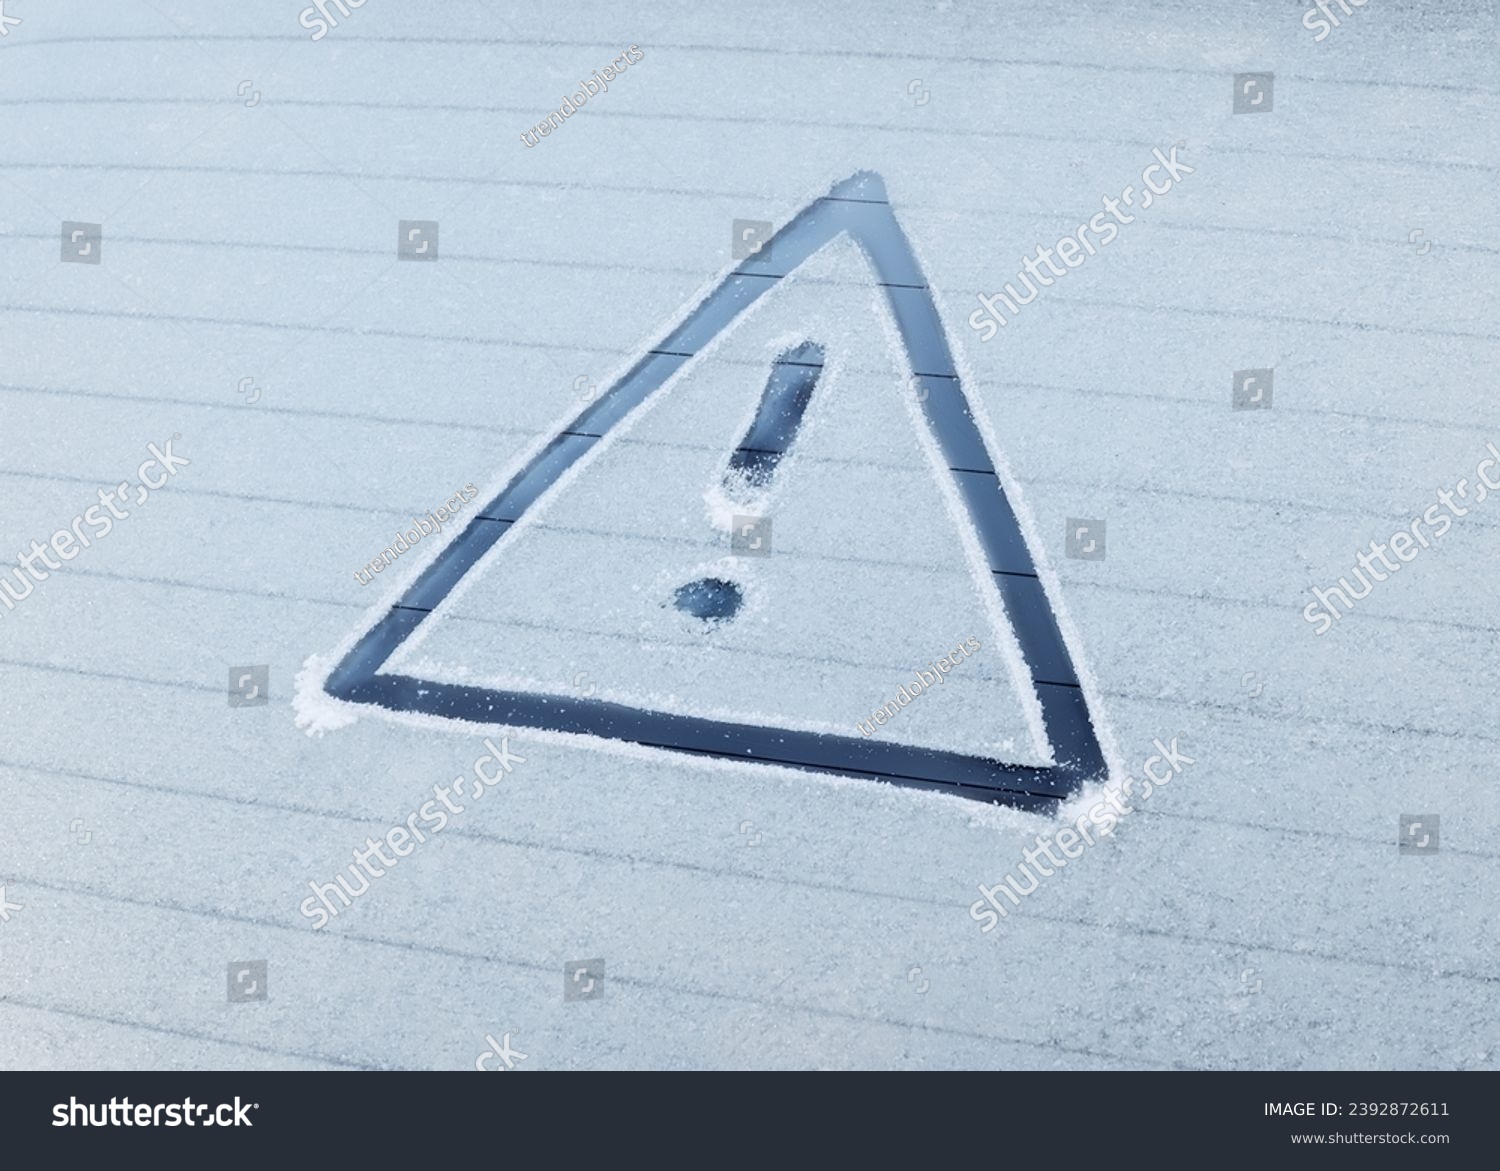 Winter Driving - Caution!

A warning triangle drawn in the ice on a frozen rear window of a car. #2392872611